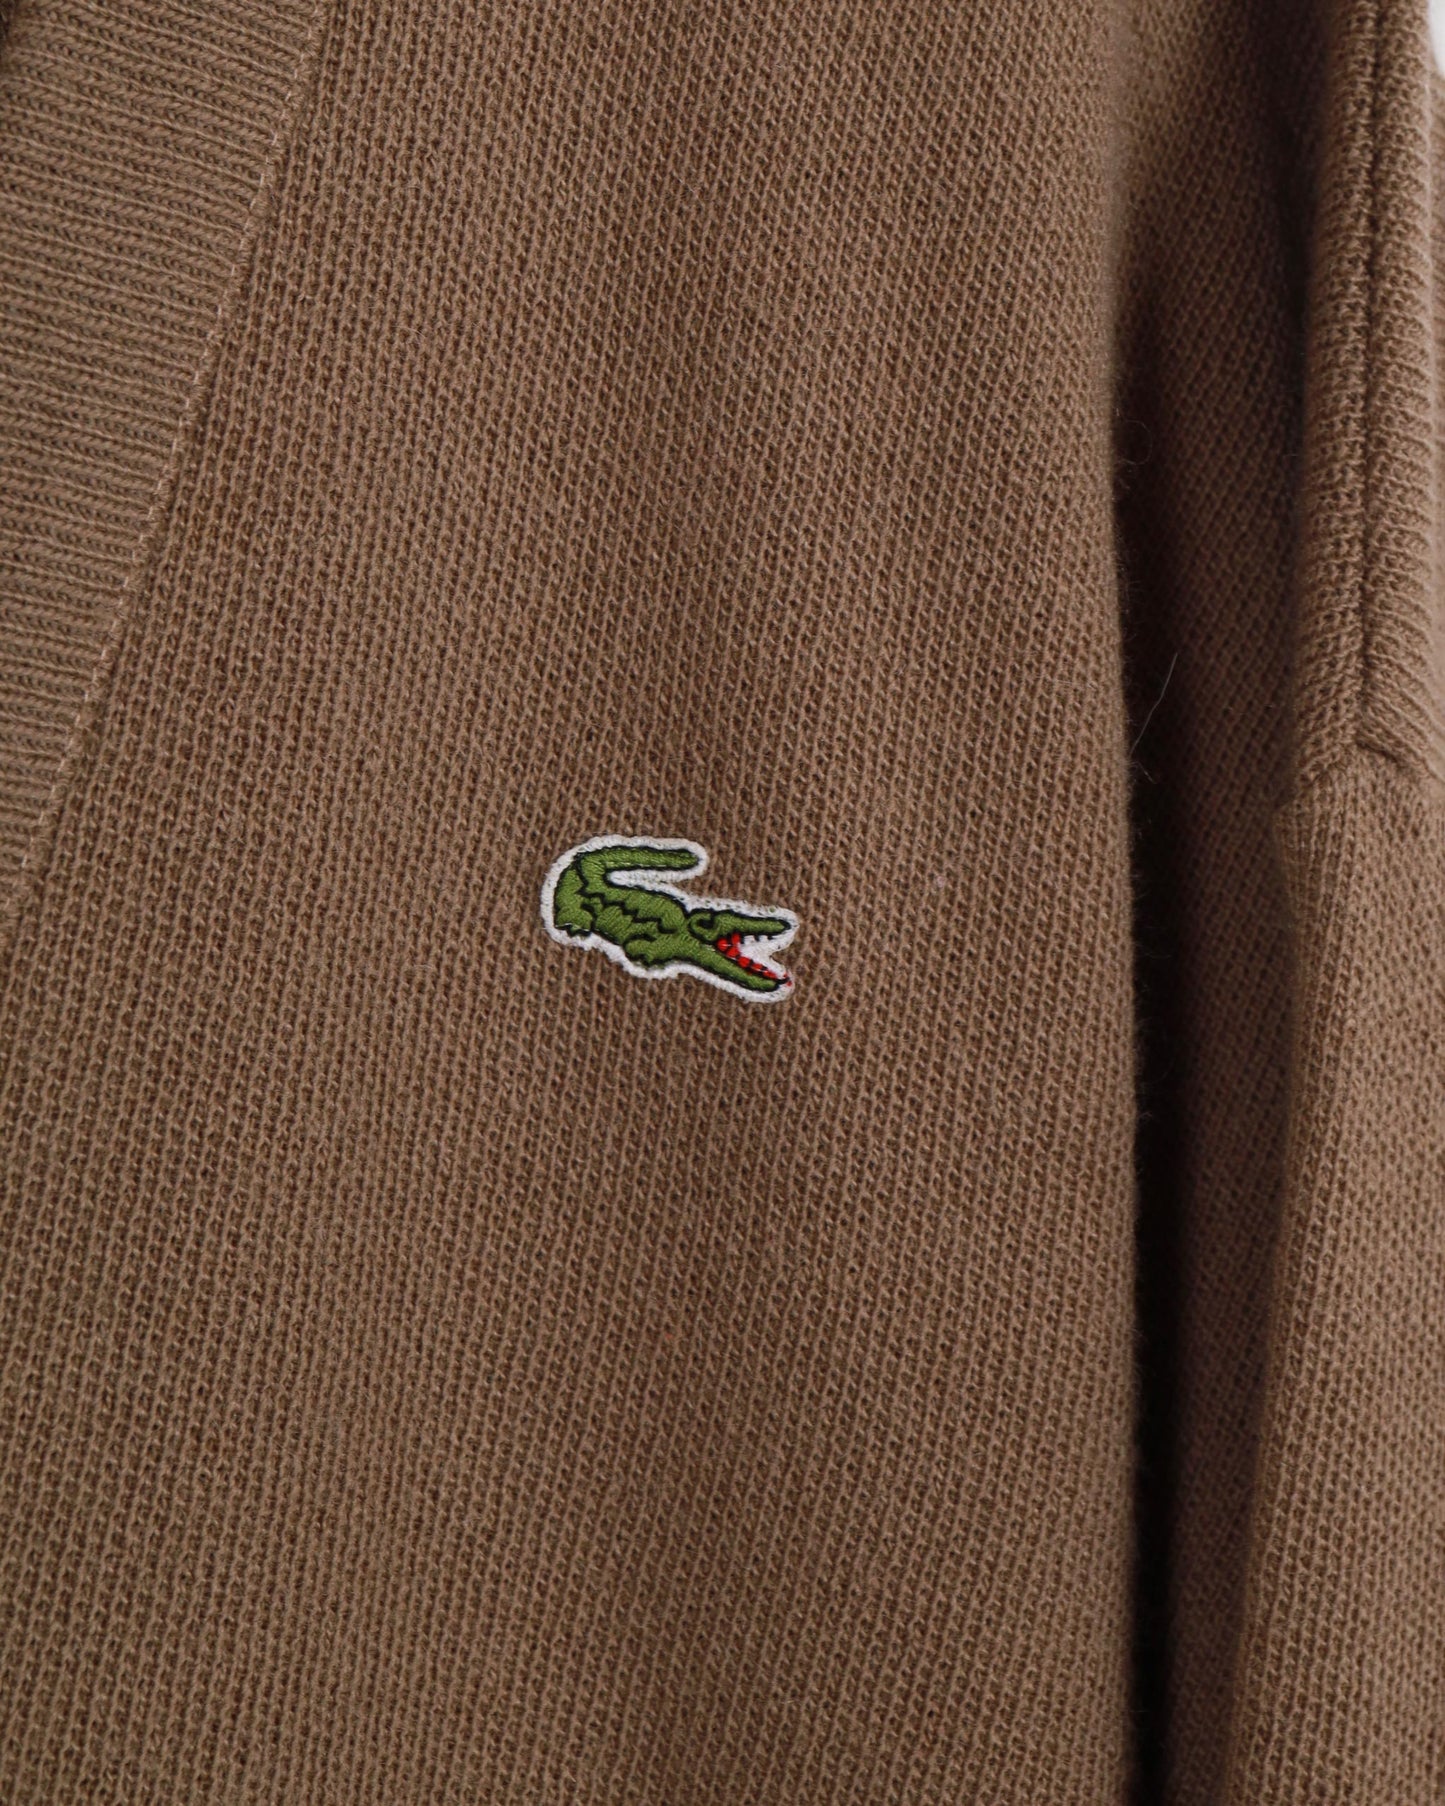 Lacoste Knitted Button Up Cardigan Brown XXL